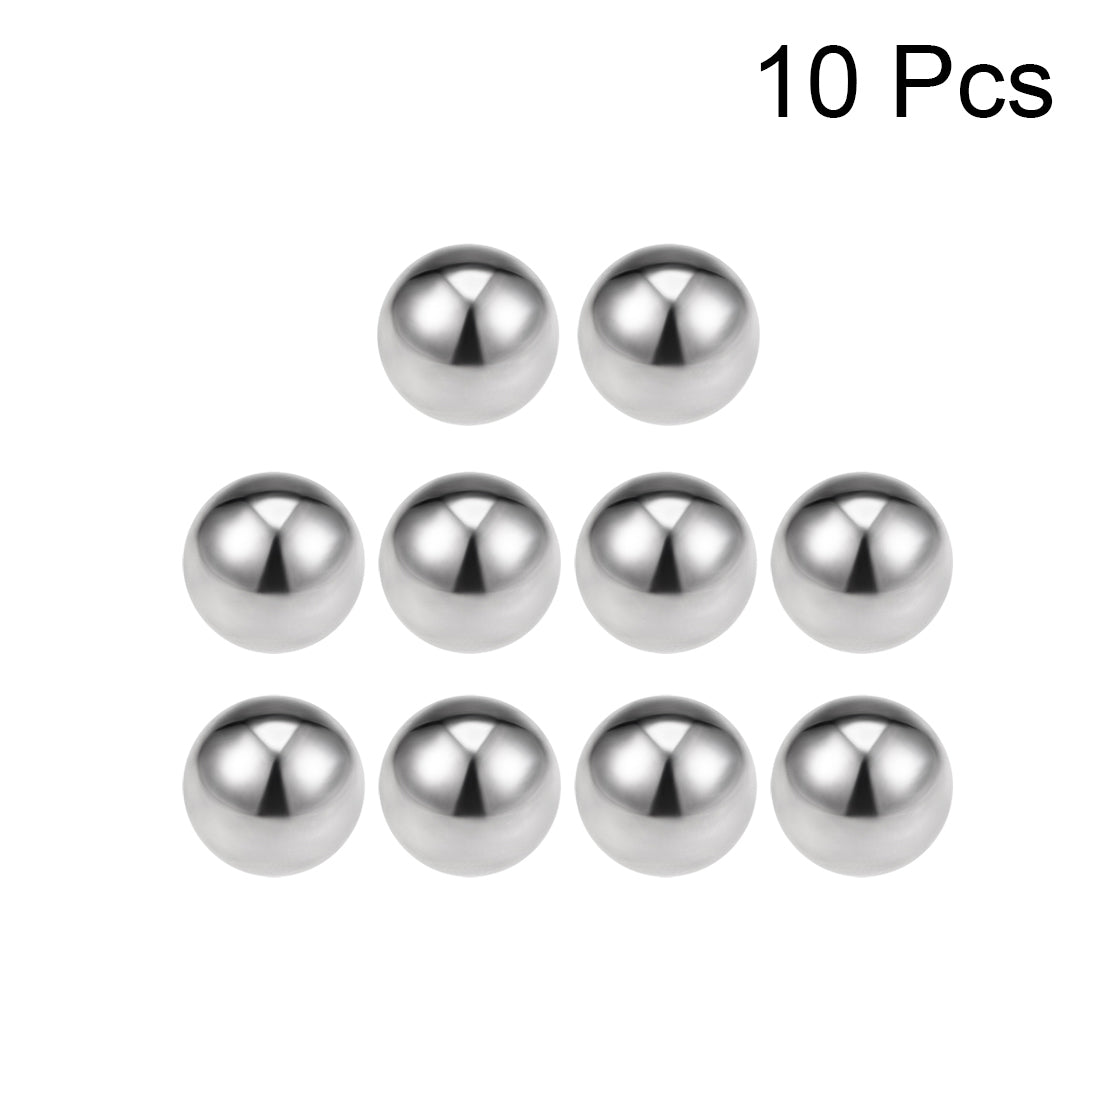 Uxcell Uxcell 1/2" Bearing Balls 304 Stainless Steel G100 Precision Balls 10pcs